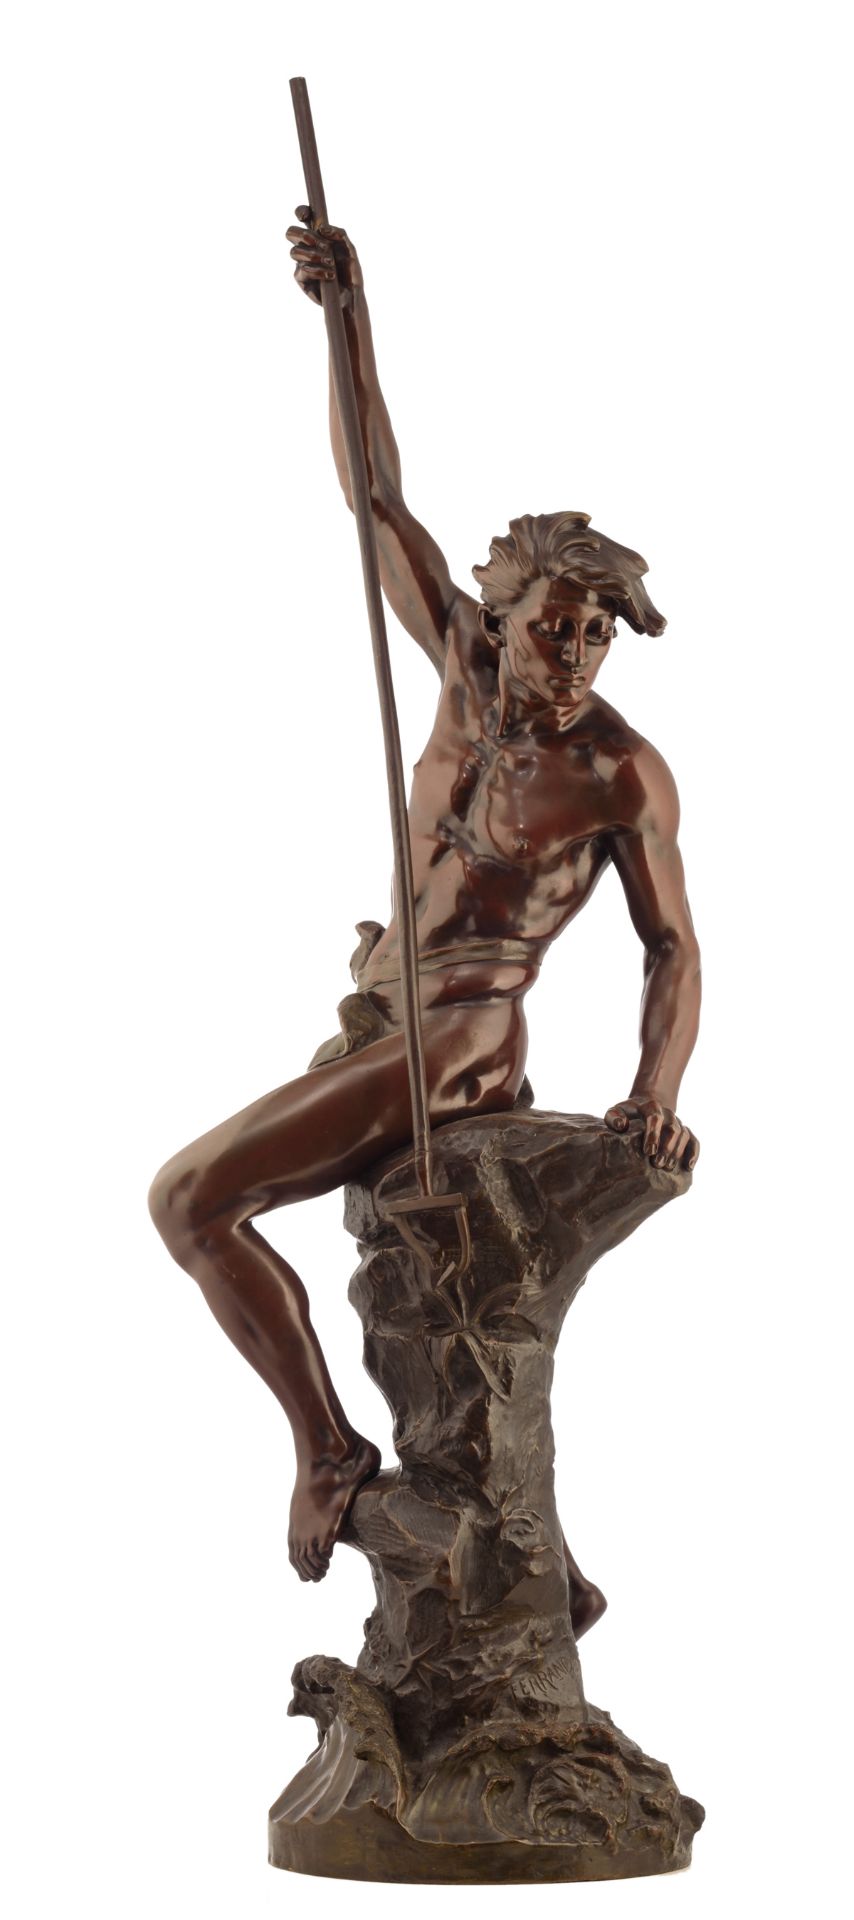 Ferrand E.J., a fisherman with his harpoon, patinated bronze, H 116 cm